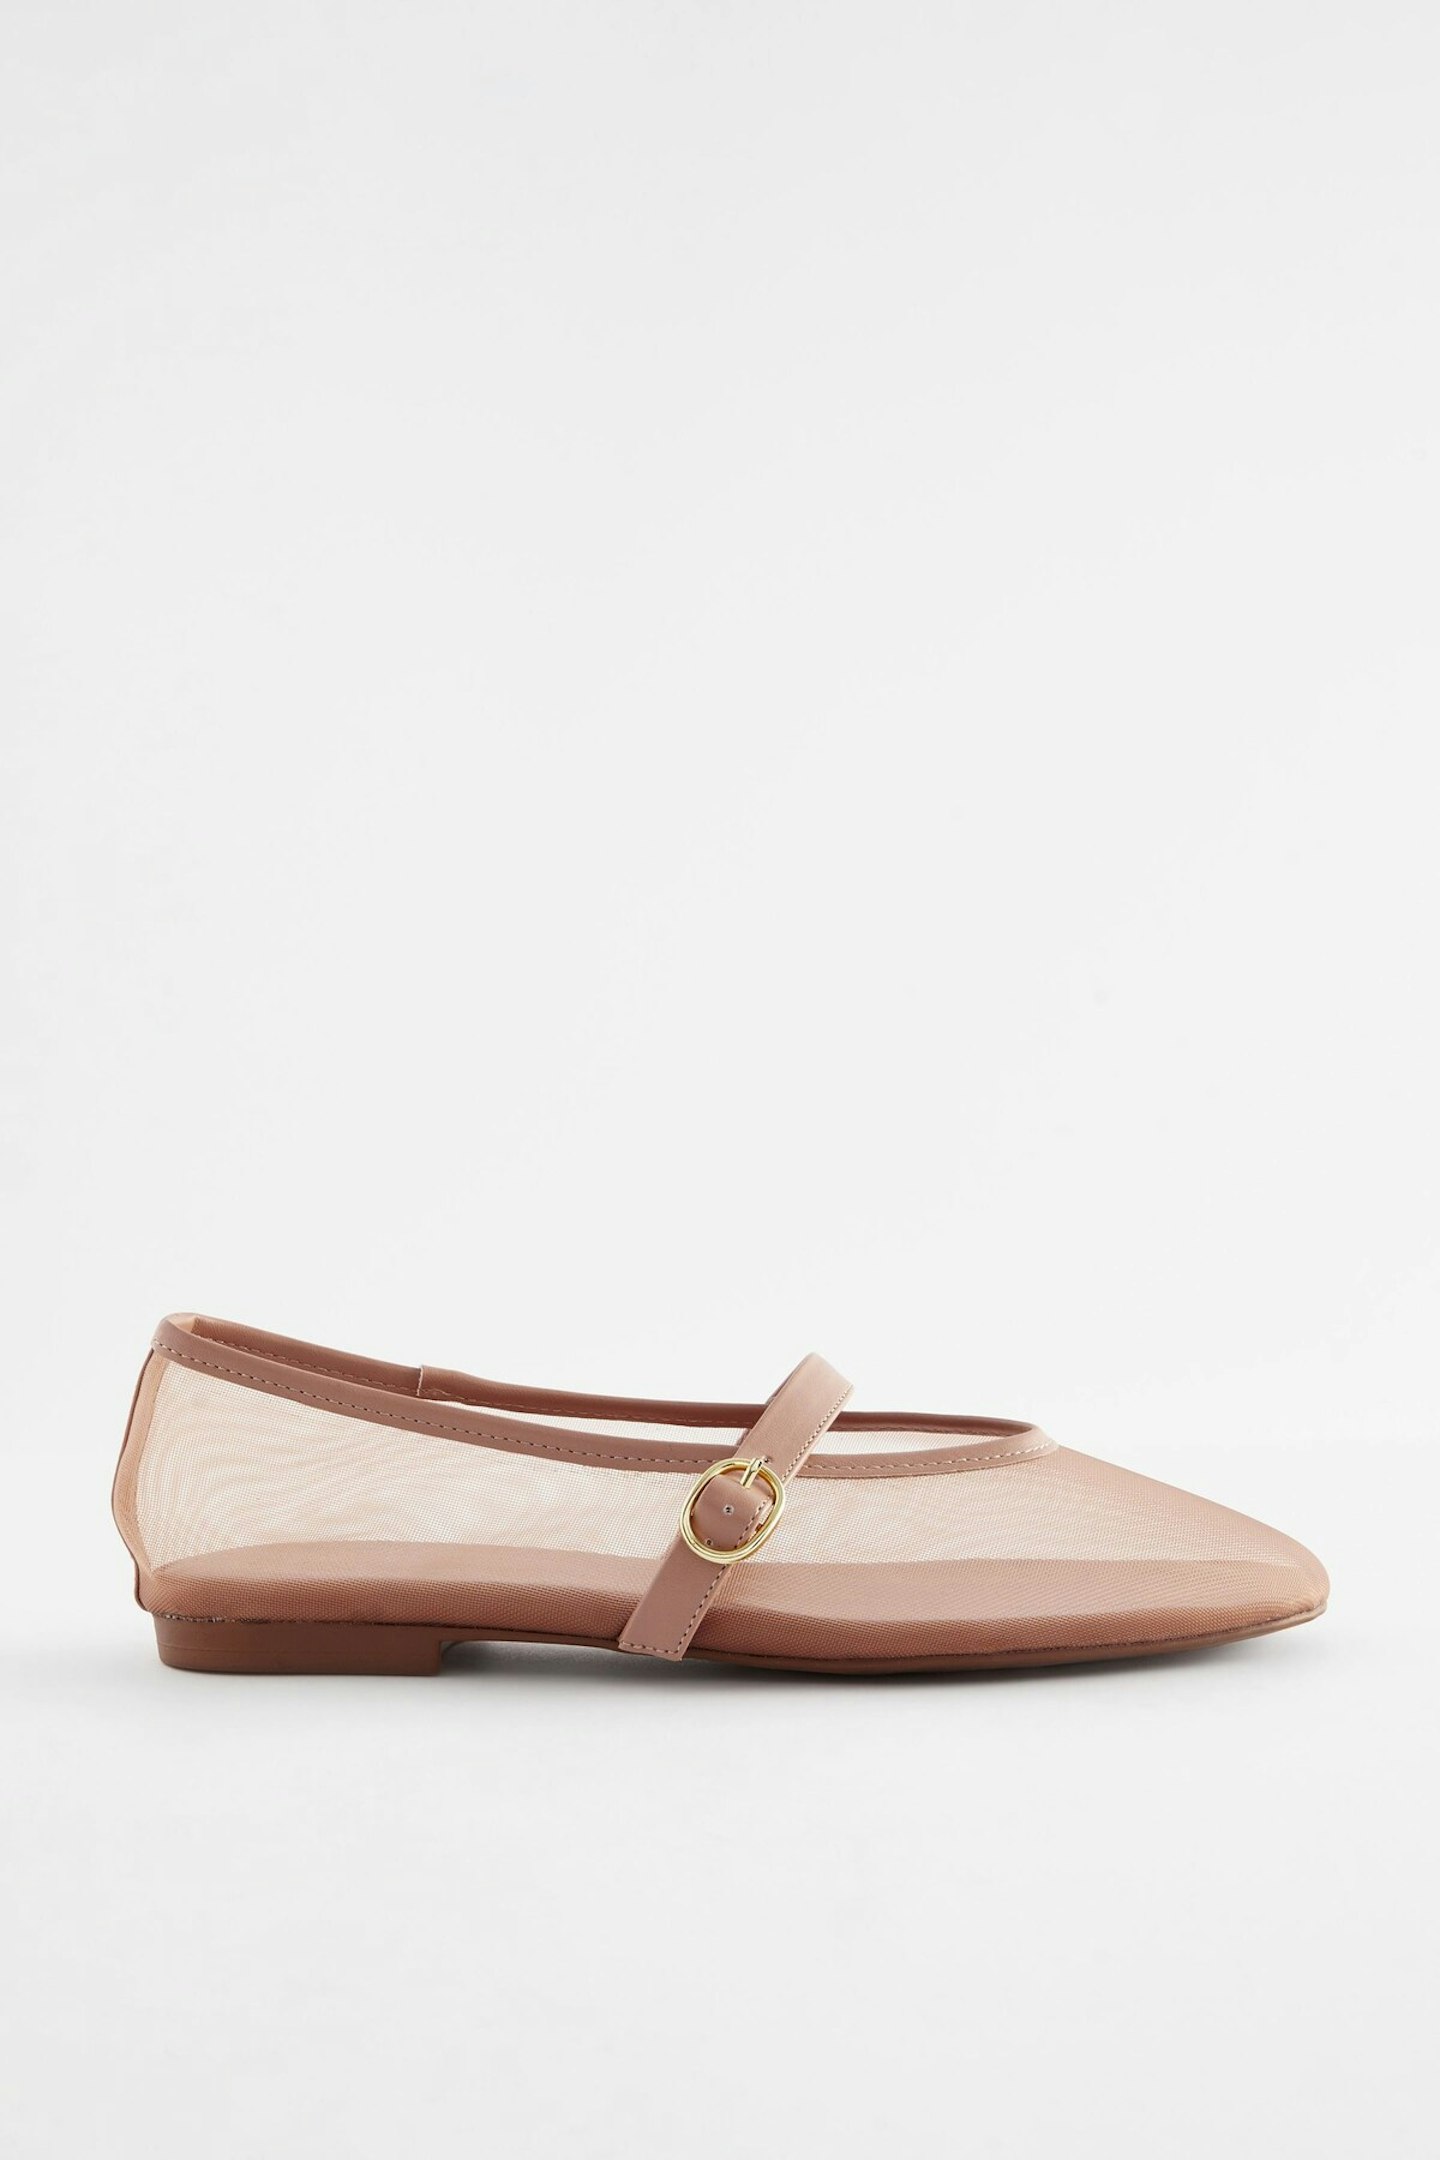 Next forever comfort nude mesh Mary Jane shoes, 